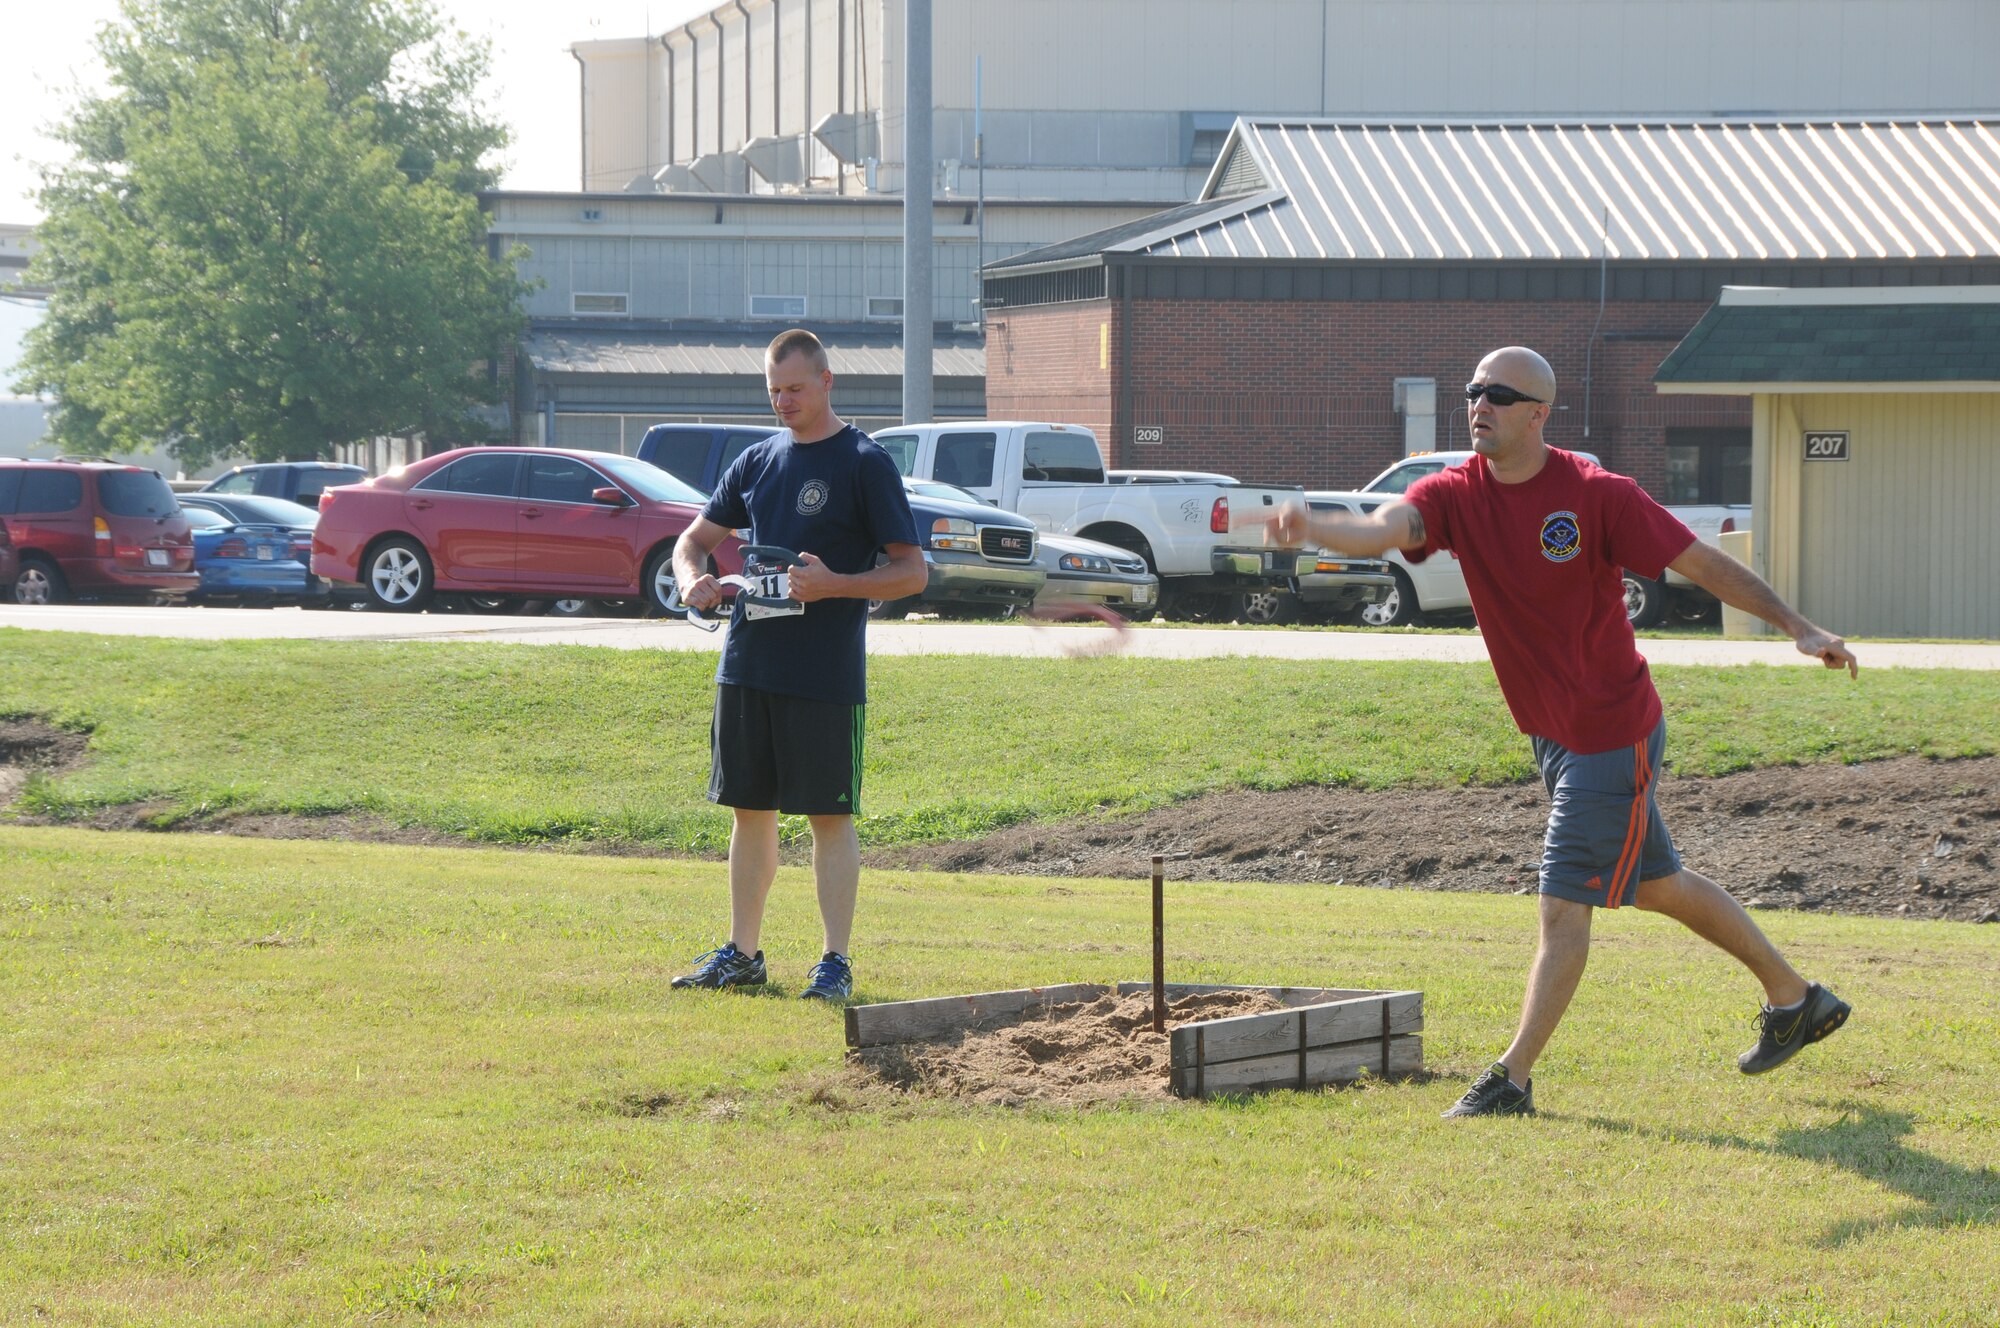 Tech Sgt. Keelan Hunt, 153rd Intelligence Squadron, participates in a game of horseshoes during Wingman Day at the 188th Wing’s Ebbing Air National Guard Base Fort Smith, Arkansas, on Aug. 2, 2014. Events included volleyball, a free throw contest, a 1.5-mile run, fishing pole casting contest, golf chipping contest, golf cart driving course, and multiple fitness stations competition. (U.S. Air National Guard photo by Airman 1st Class Cody Martin/released)